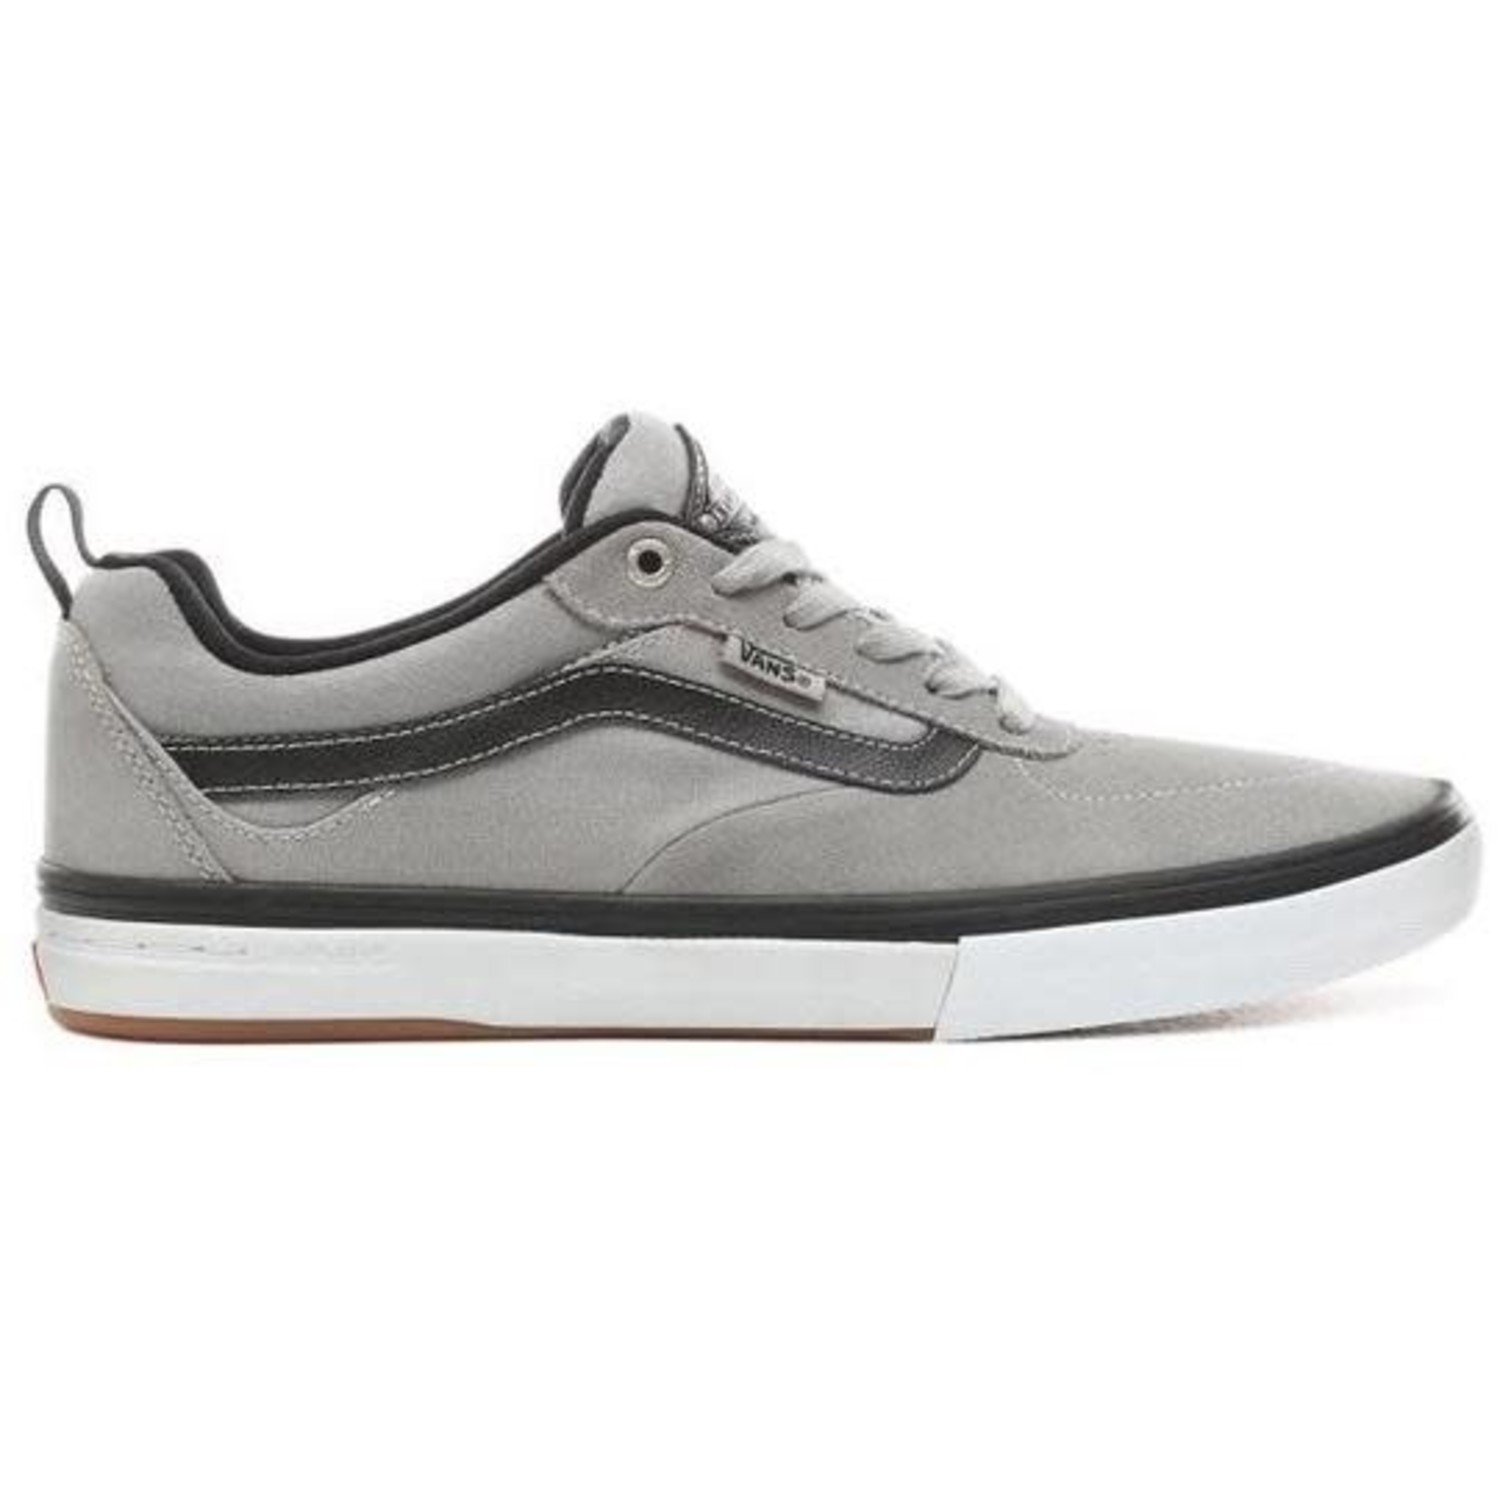 vans board shoes Online Shopping for 